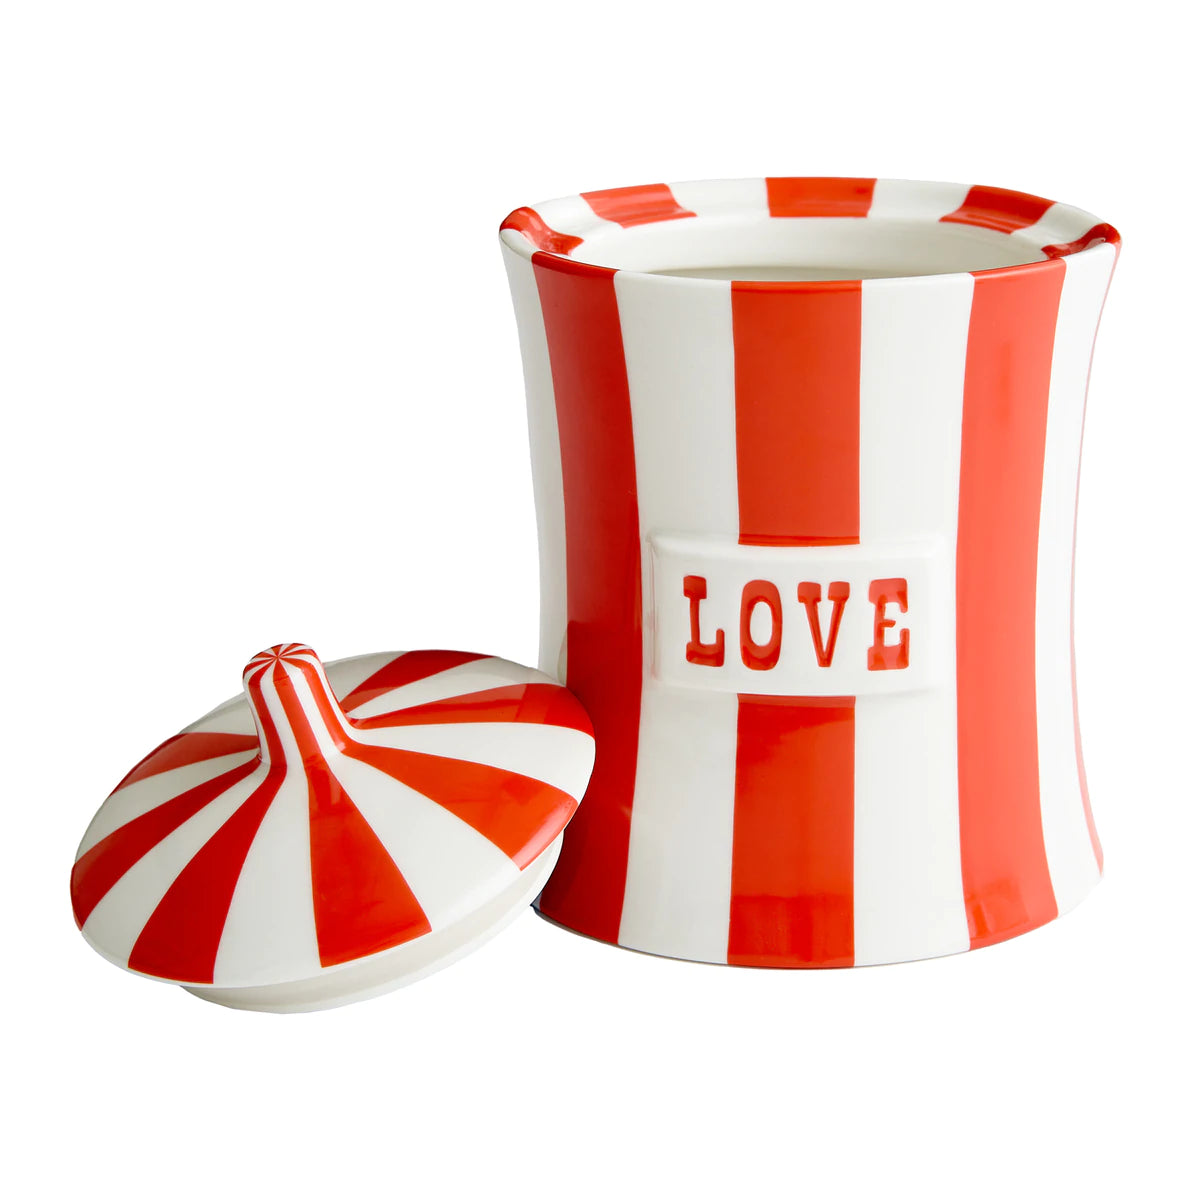 Vice Love Canister by Jonathan Adler